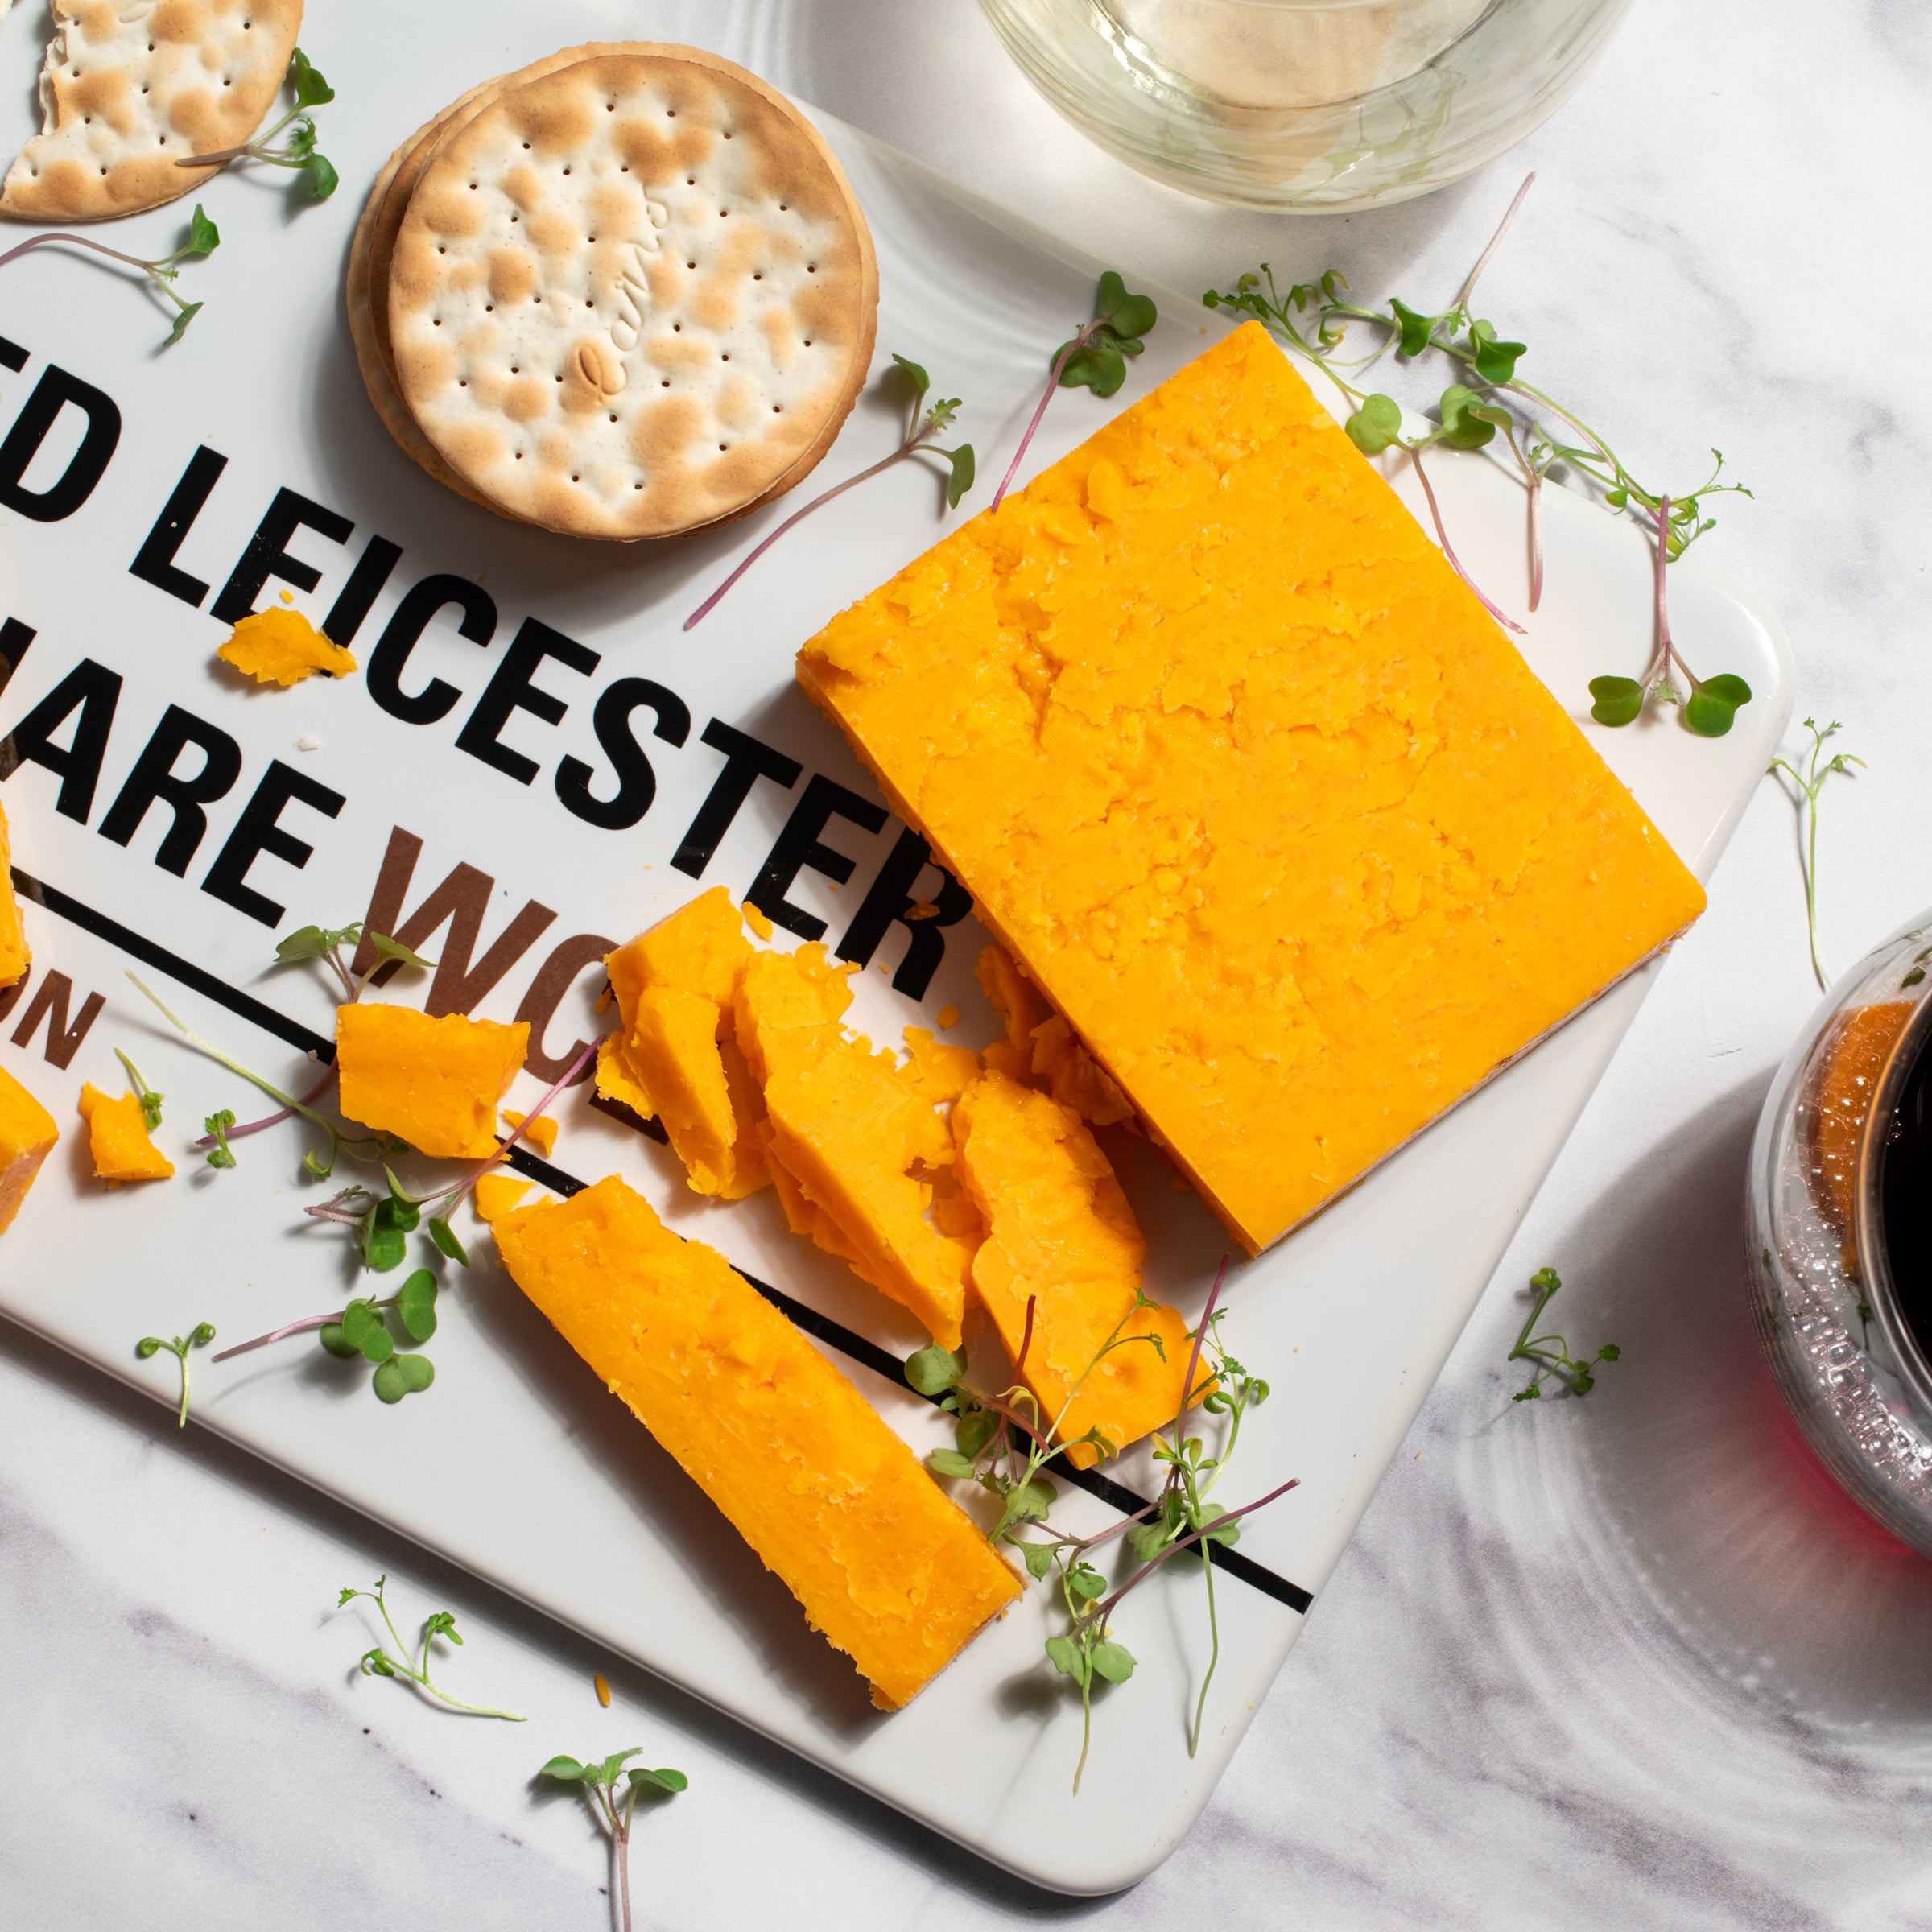 Mature Red Leicester Cheese